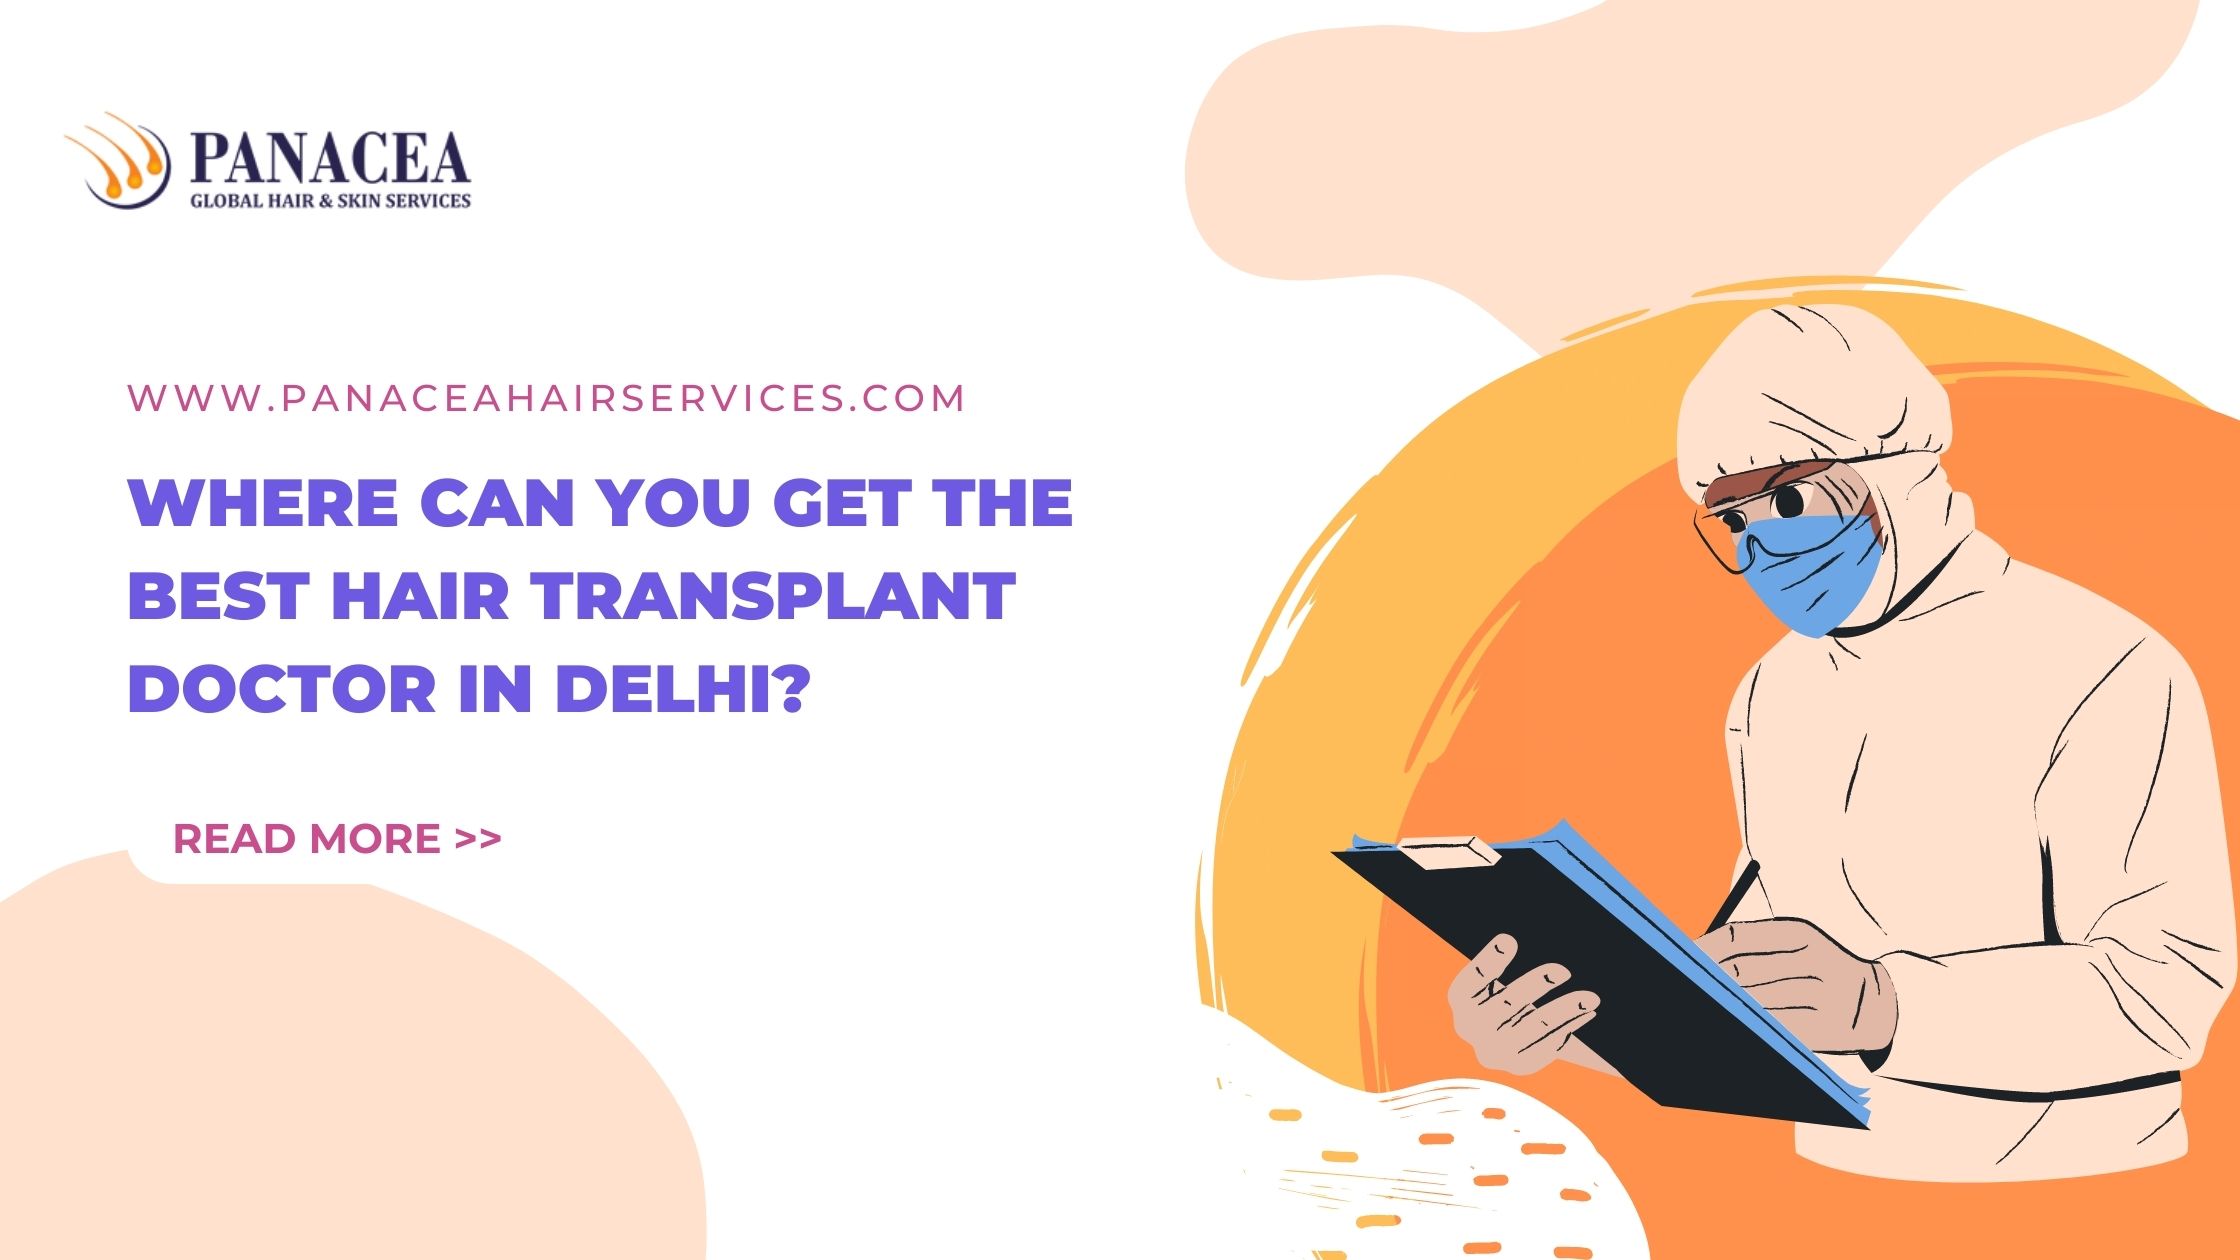 Where can you get the Best Hair Transplant Doctor in Delhi?